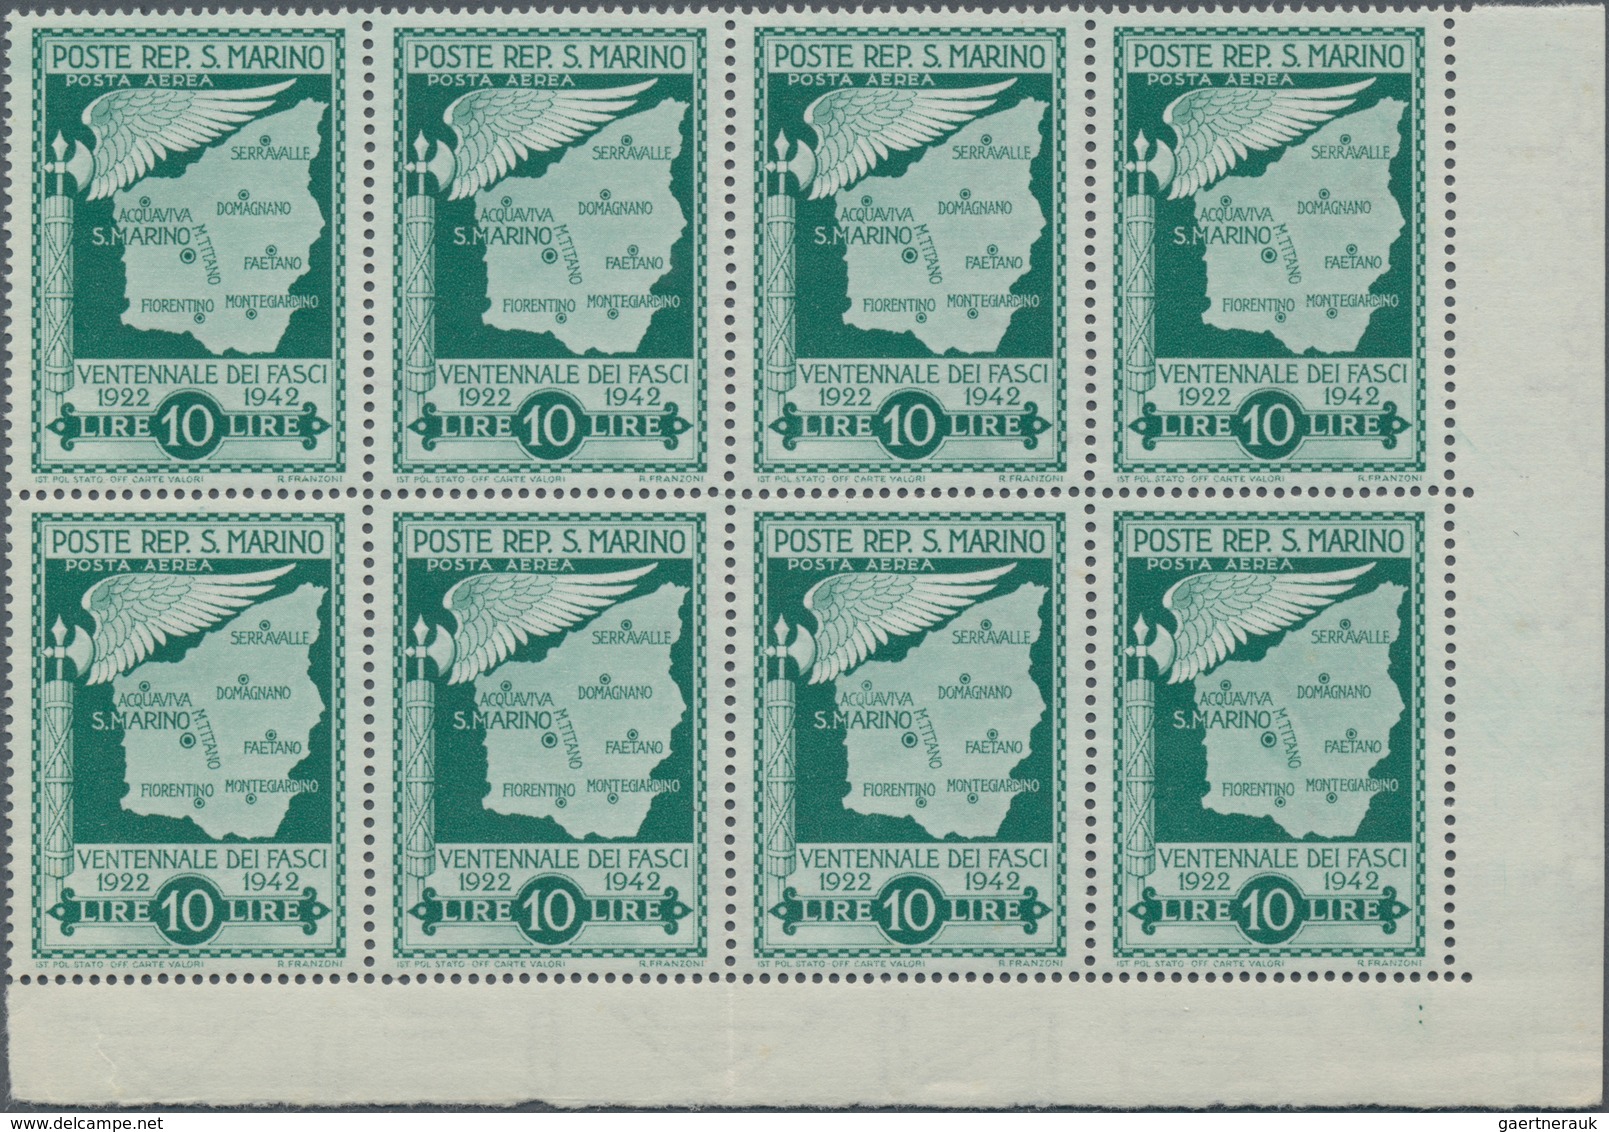 San Marino: 1943, Downfall Of Facism UNISSUED Airmail Stamp 10lire Green Without Overprint In A Lot - Usados